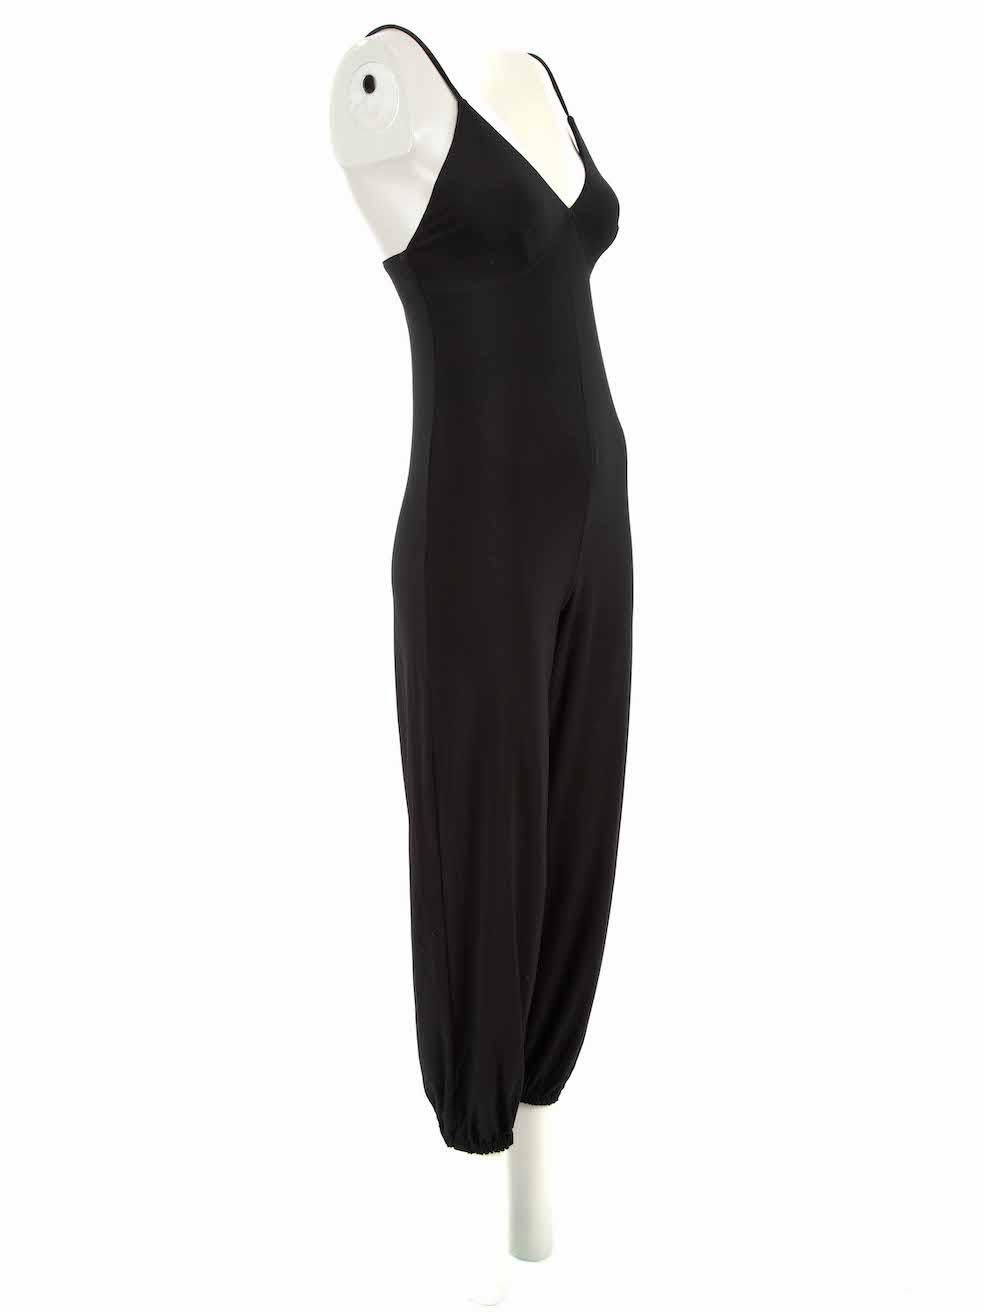 CONDITION is Very good. Hardly any visible wear to jumpsuit is evident on this used Norma Kamali designer resale item.
 
Details
Black
Polyester
Jumpsuit
Sleeveless
Sweetheart neckline
Figure hugging fit
Stretchy
Elasticated cuffed leg

Made in